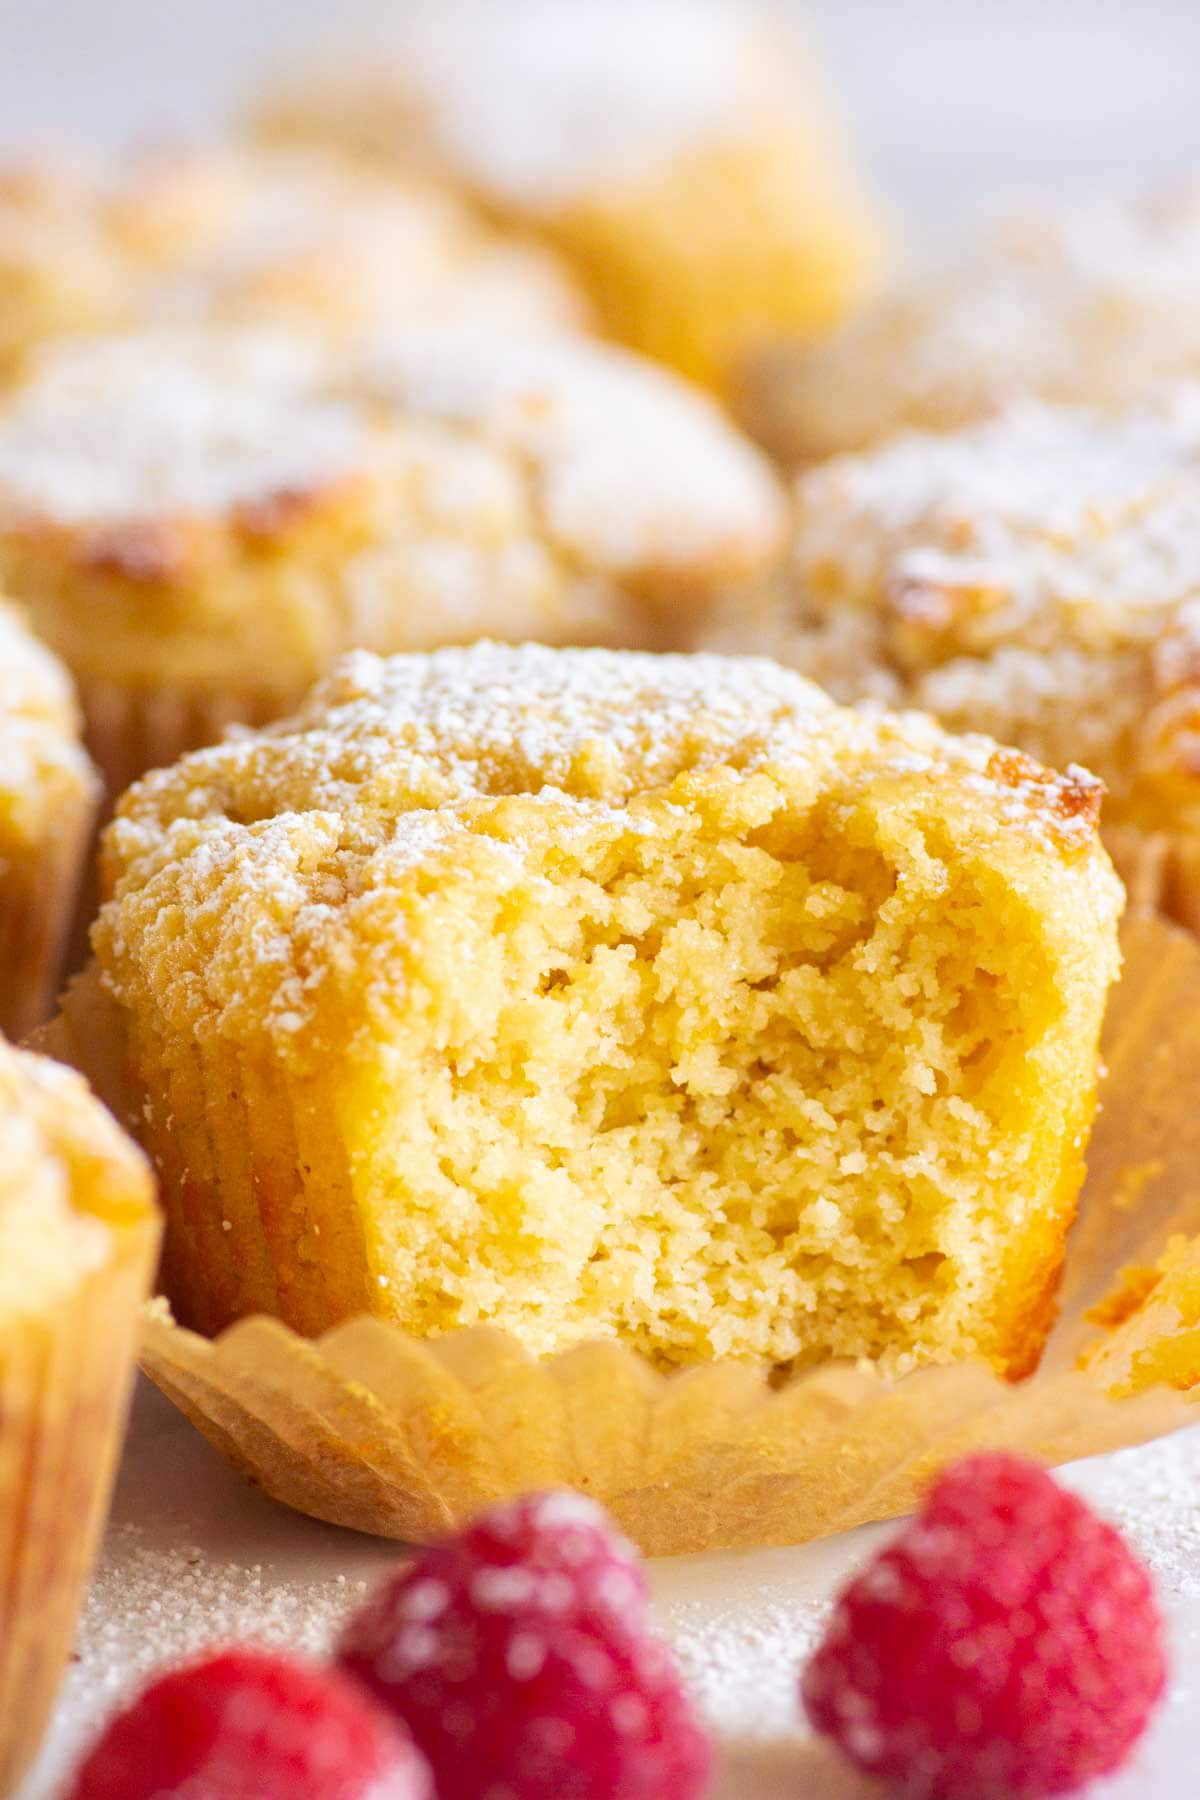 Almond flour yogurt muffins dusted with icing sugar and showing texture inside.